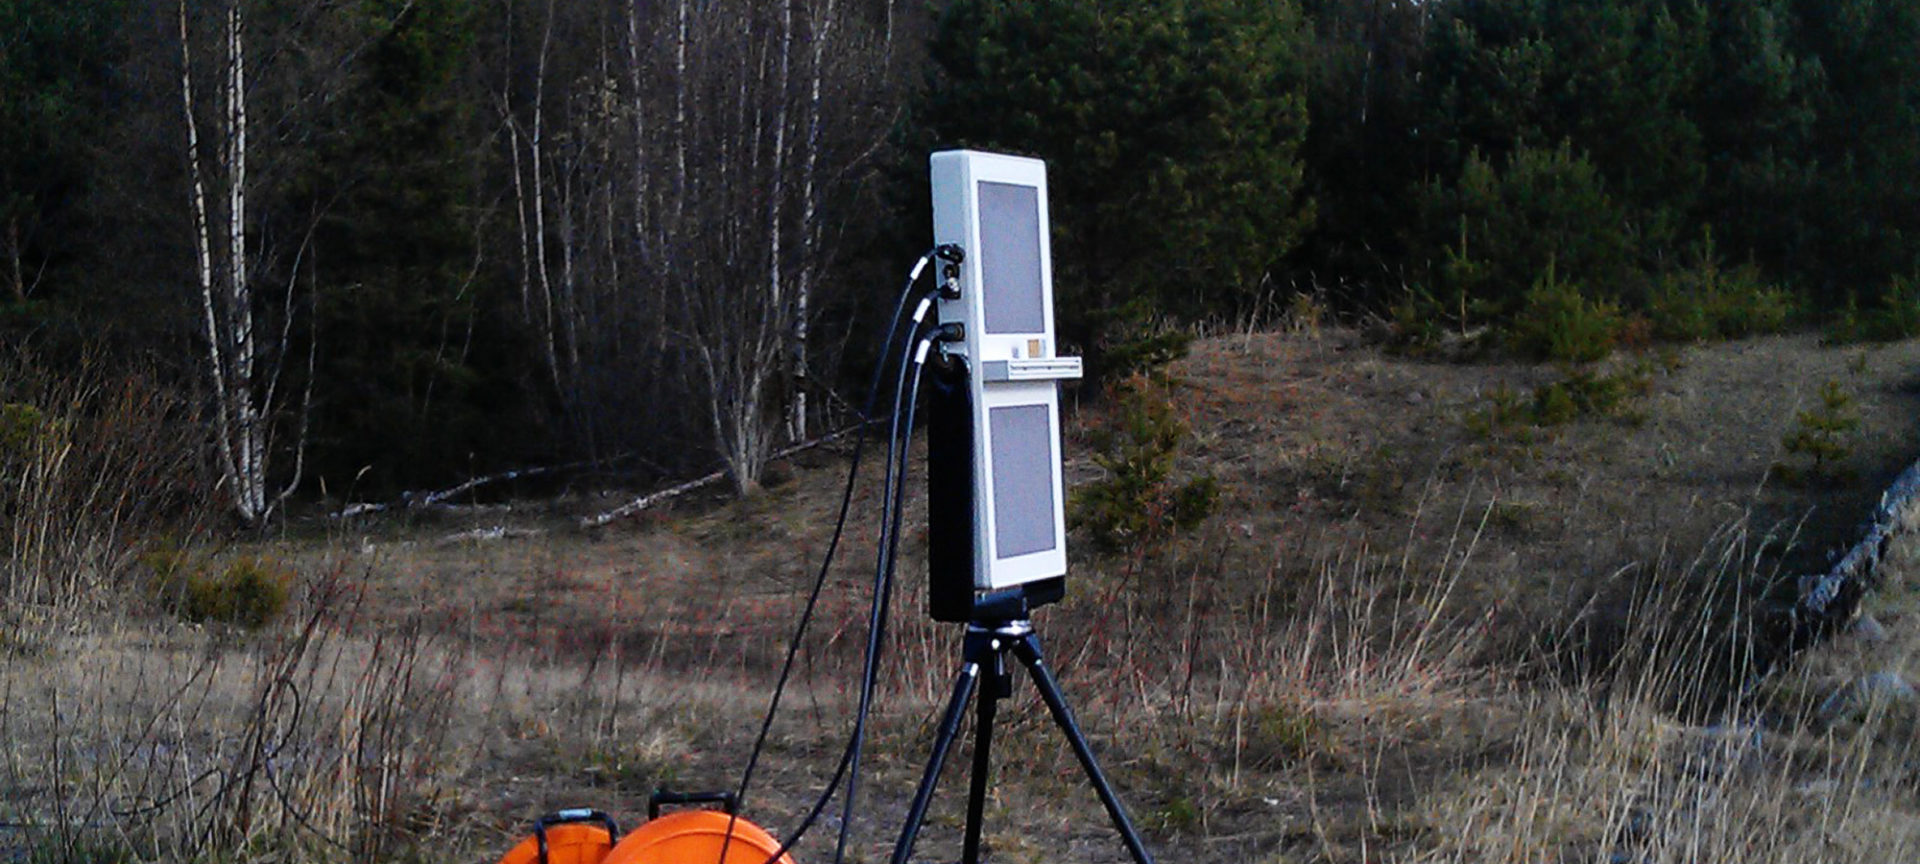 Velocity measurement for shooting ranges.